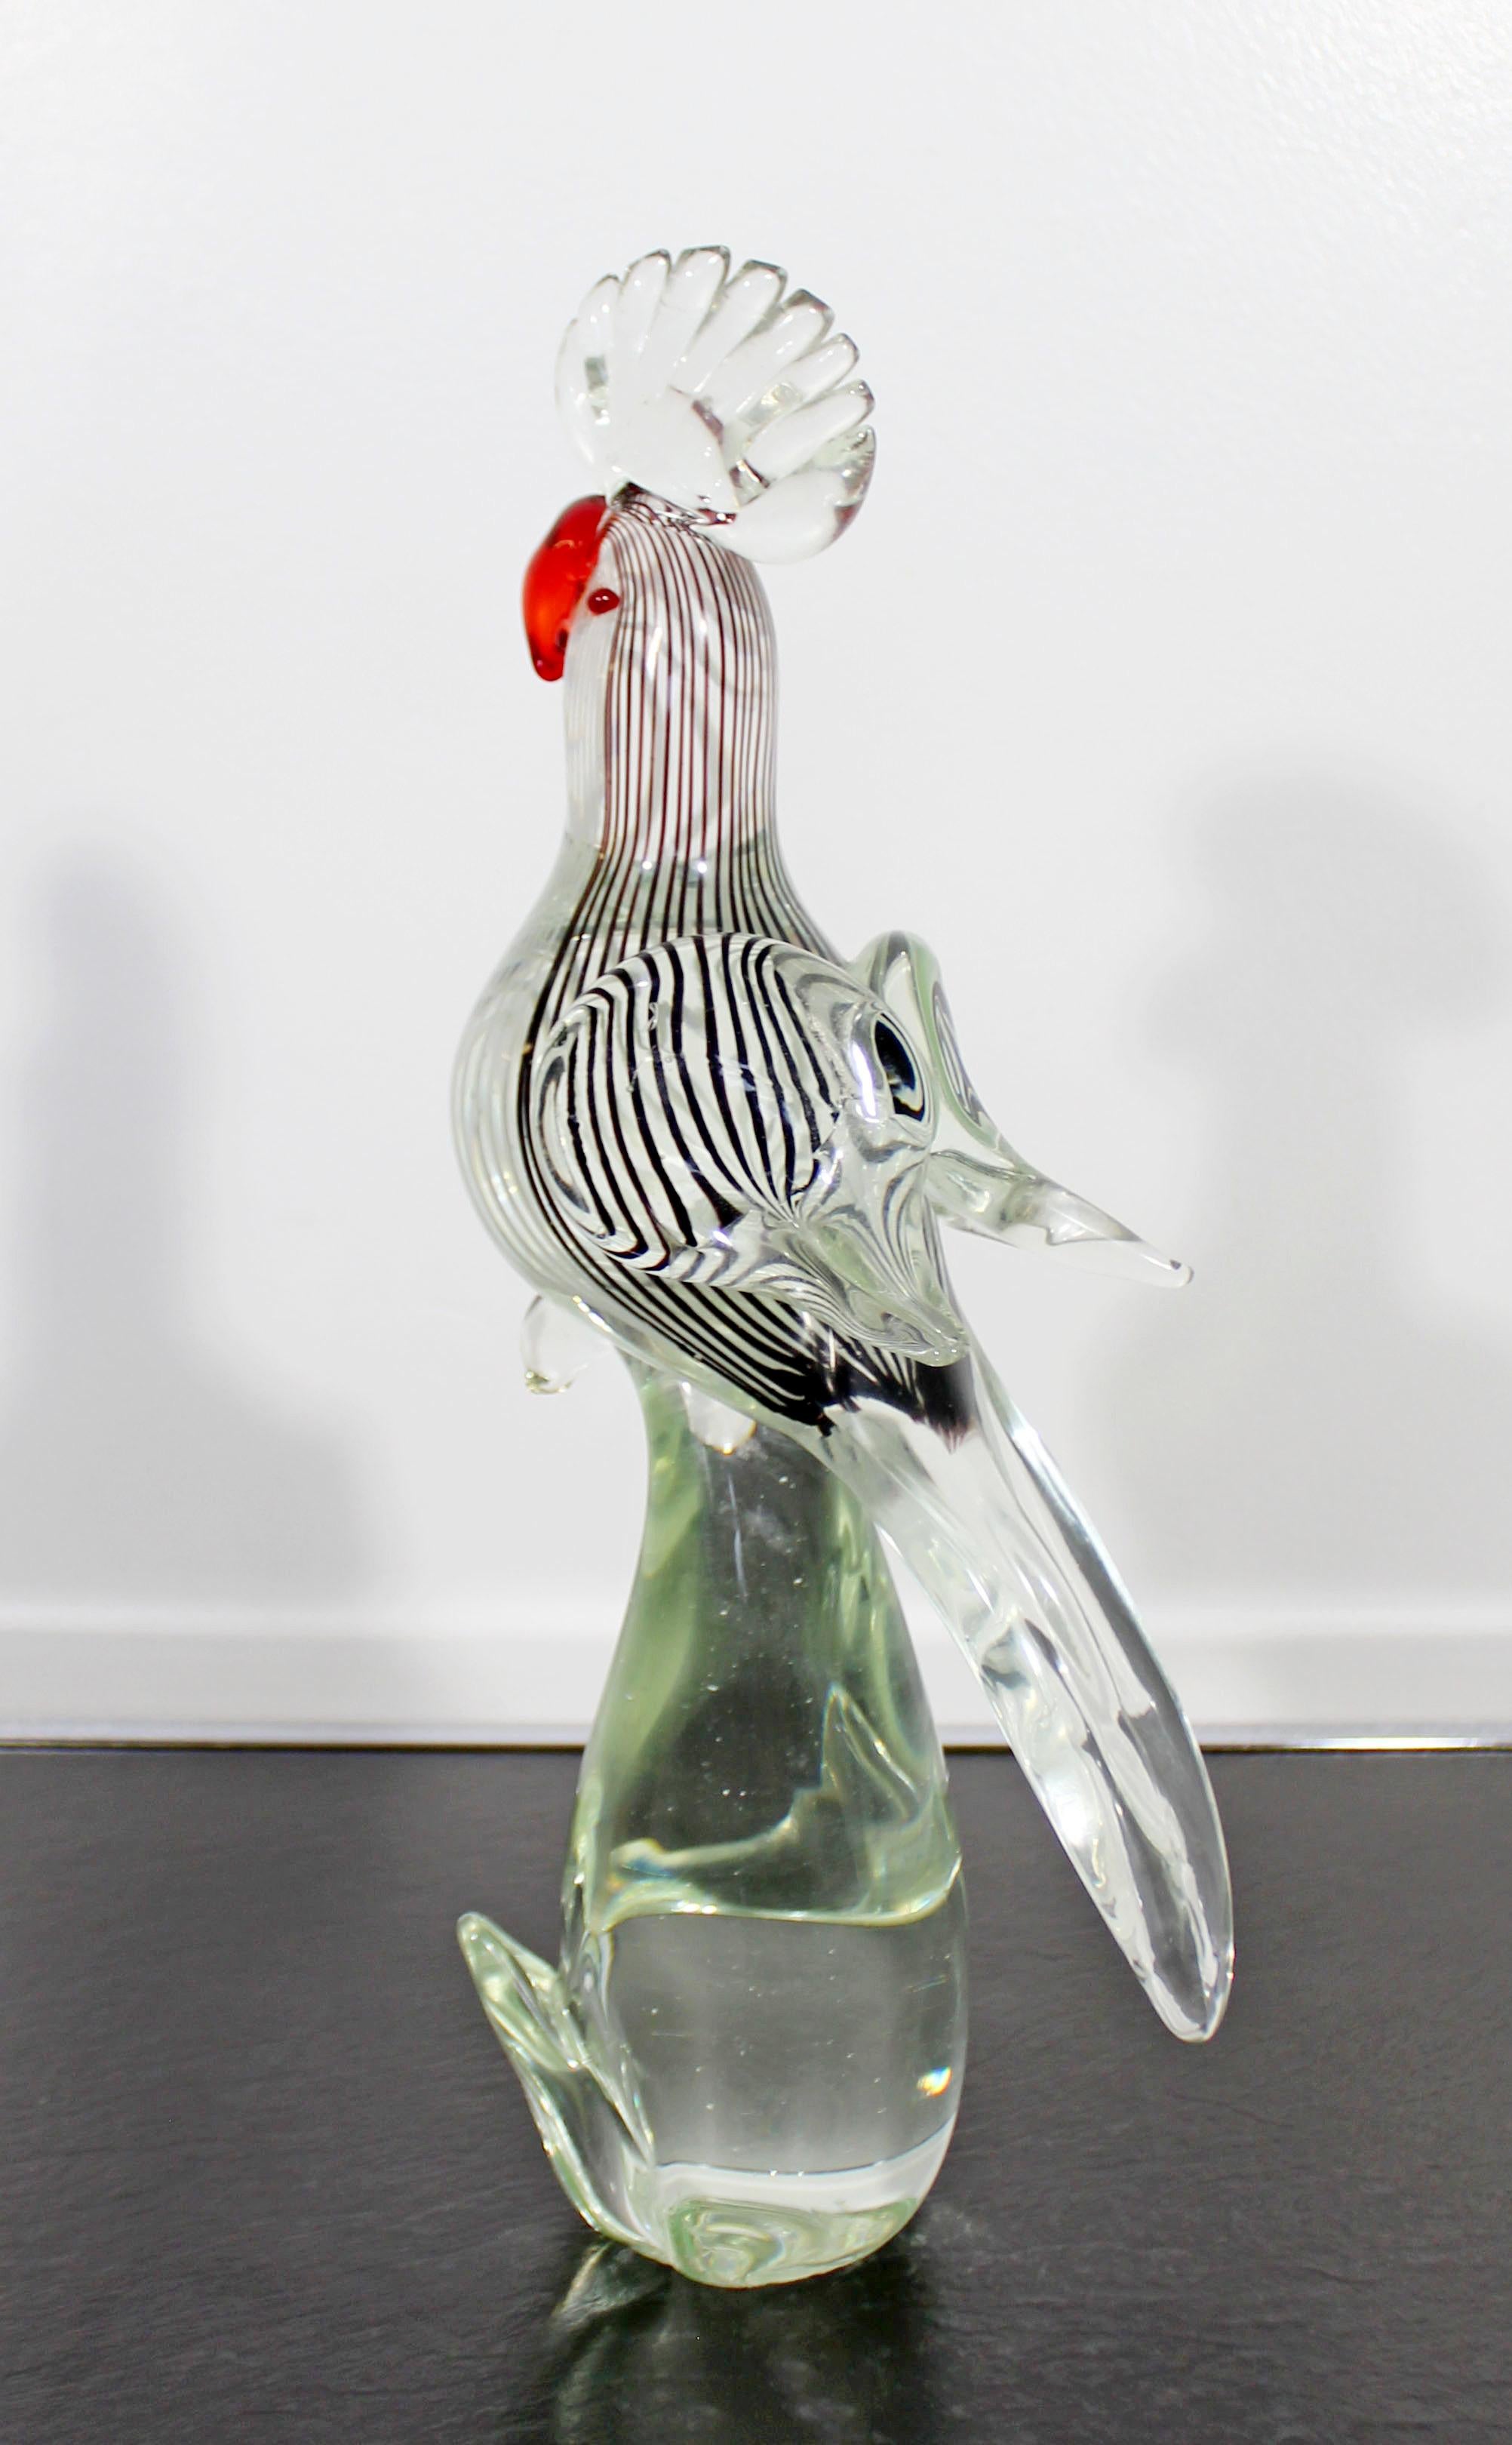 Mid-20th Century Mid-Century Modern Murano Glass Cockatoo Art Table Sculpture Italy Red, 1960s